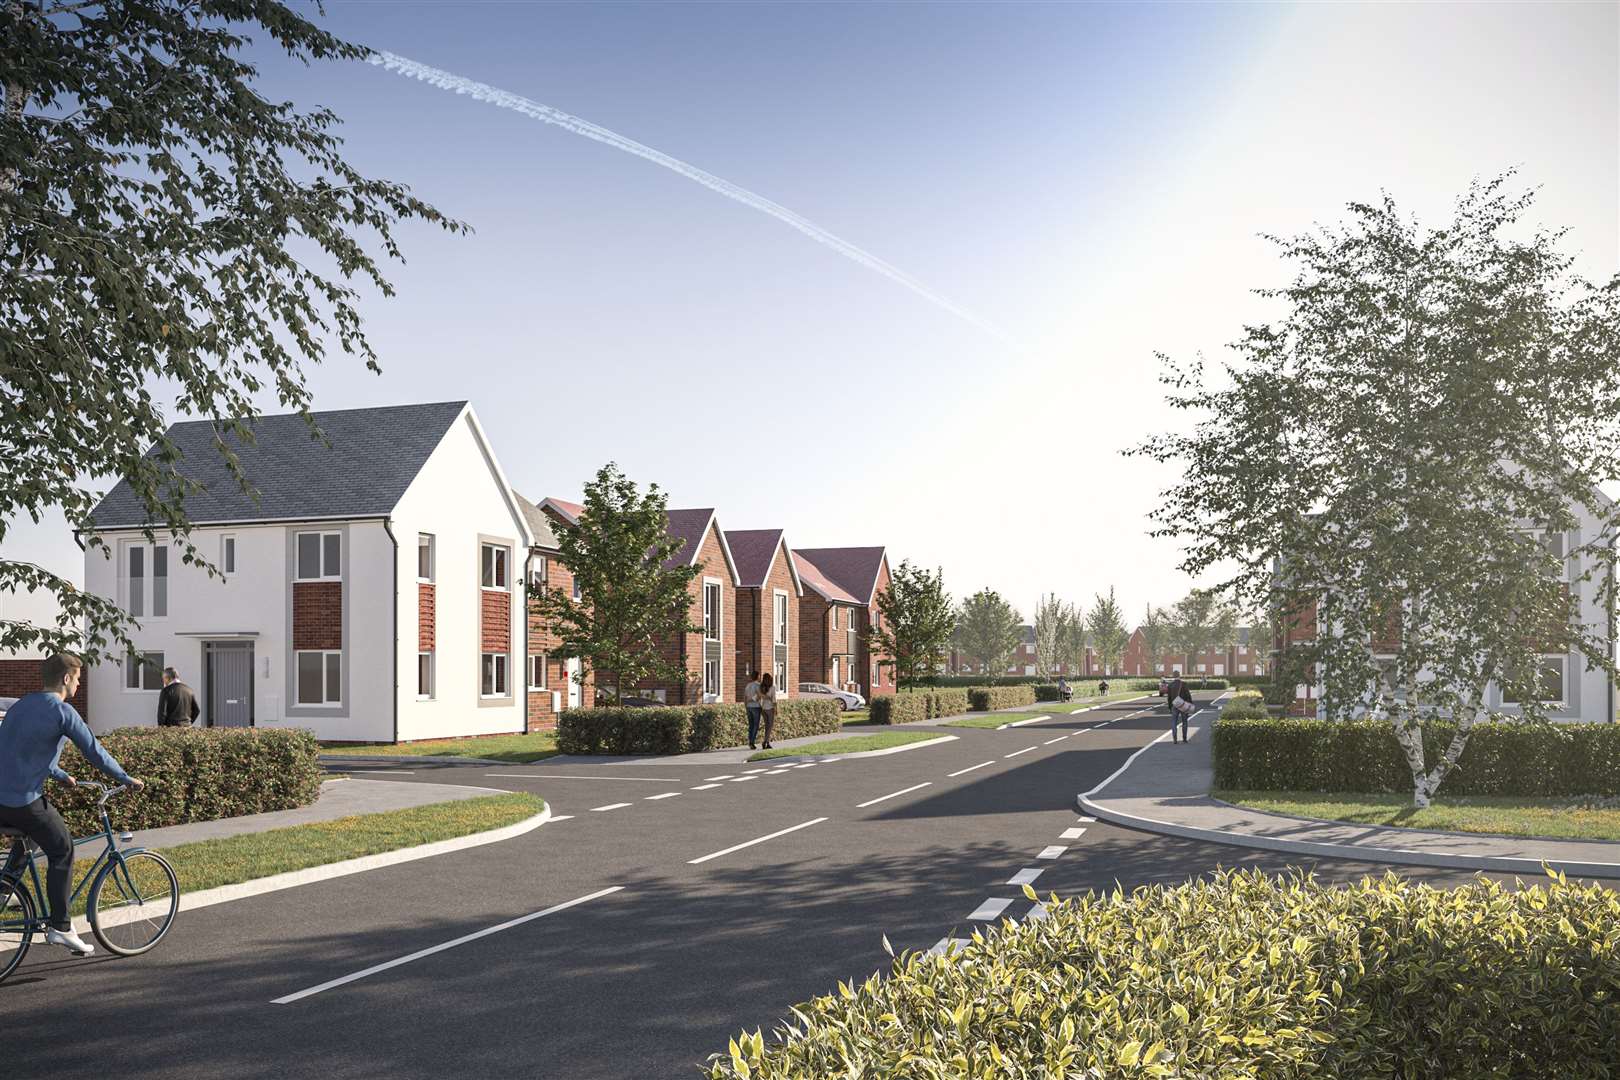 A computer generated image of what the new Modwen homes in Ditton might look like